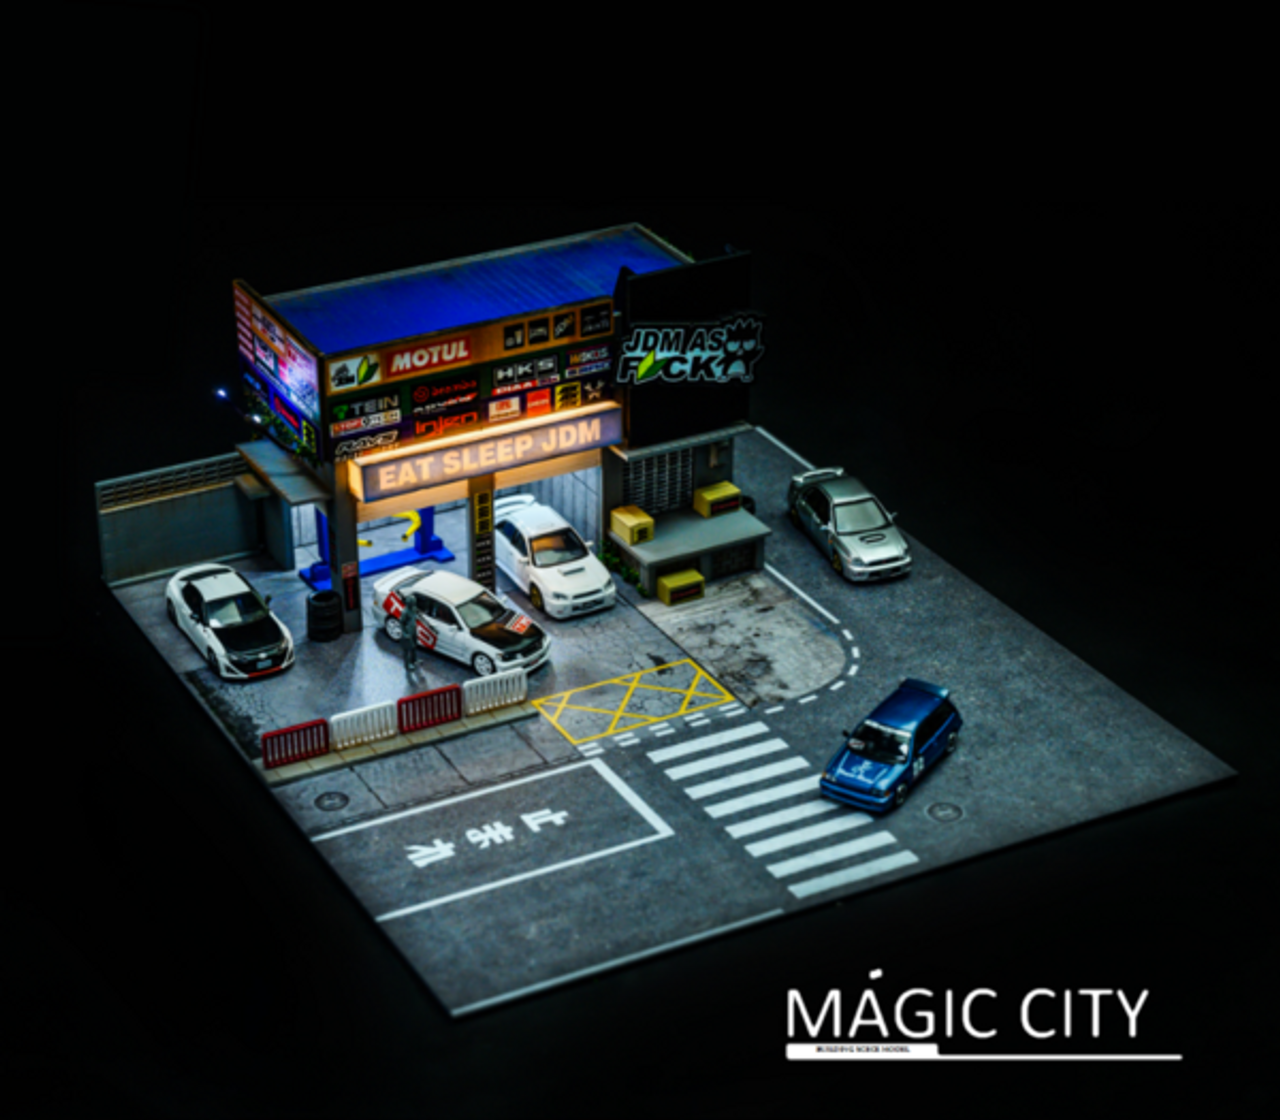 1/64 Magic City JDM Car Modification Shop Diorama (car models and figures NOT included)